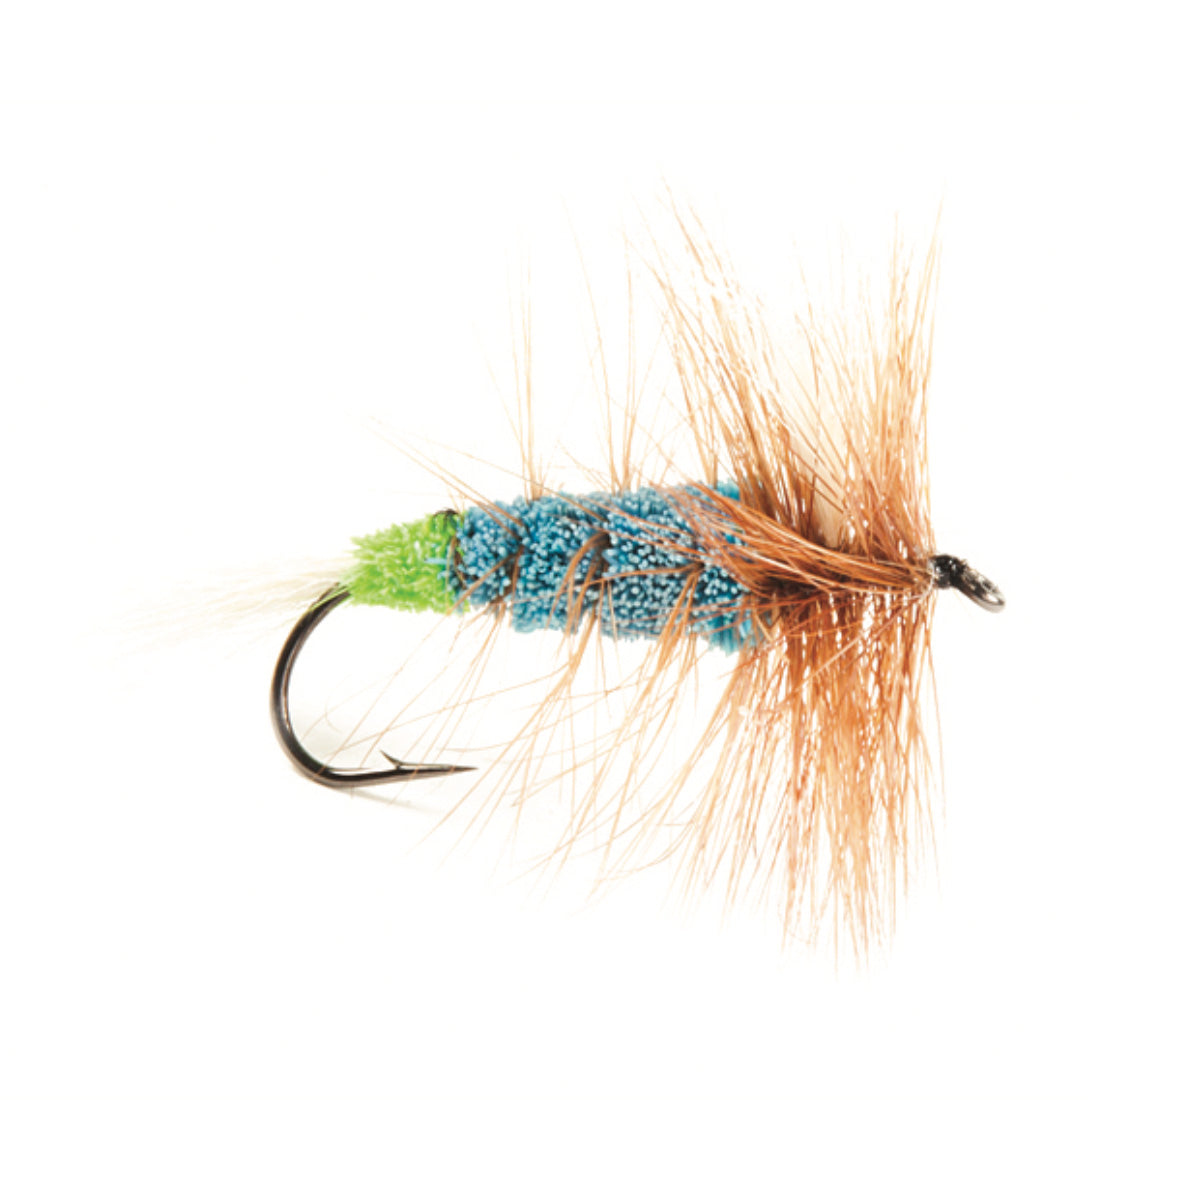 Salmon Fly Fishing Lure, Fly Fishing Brown Trout